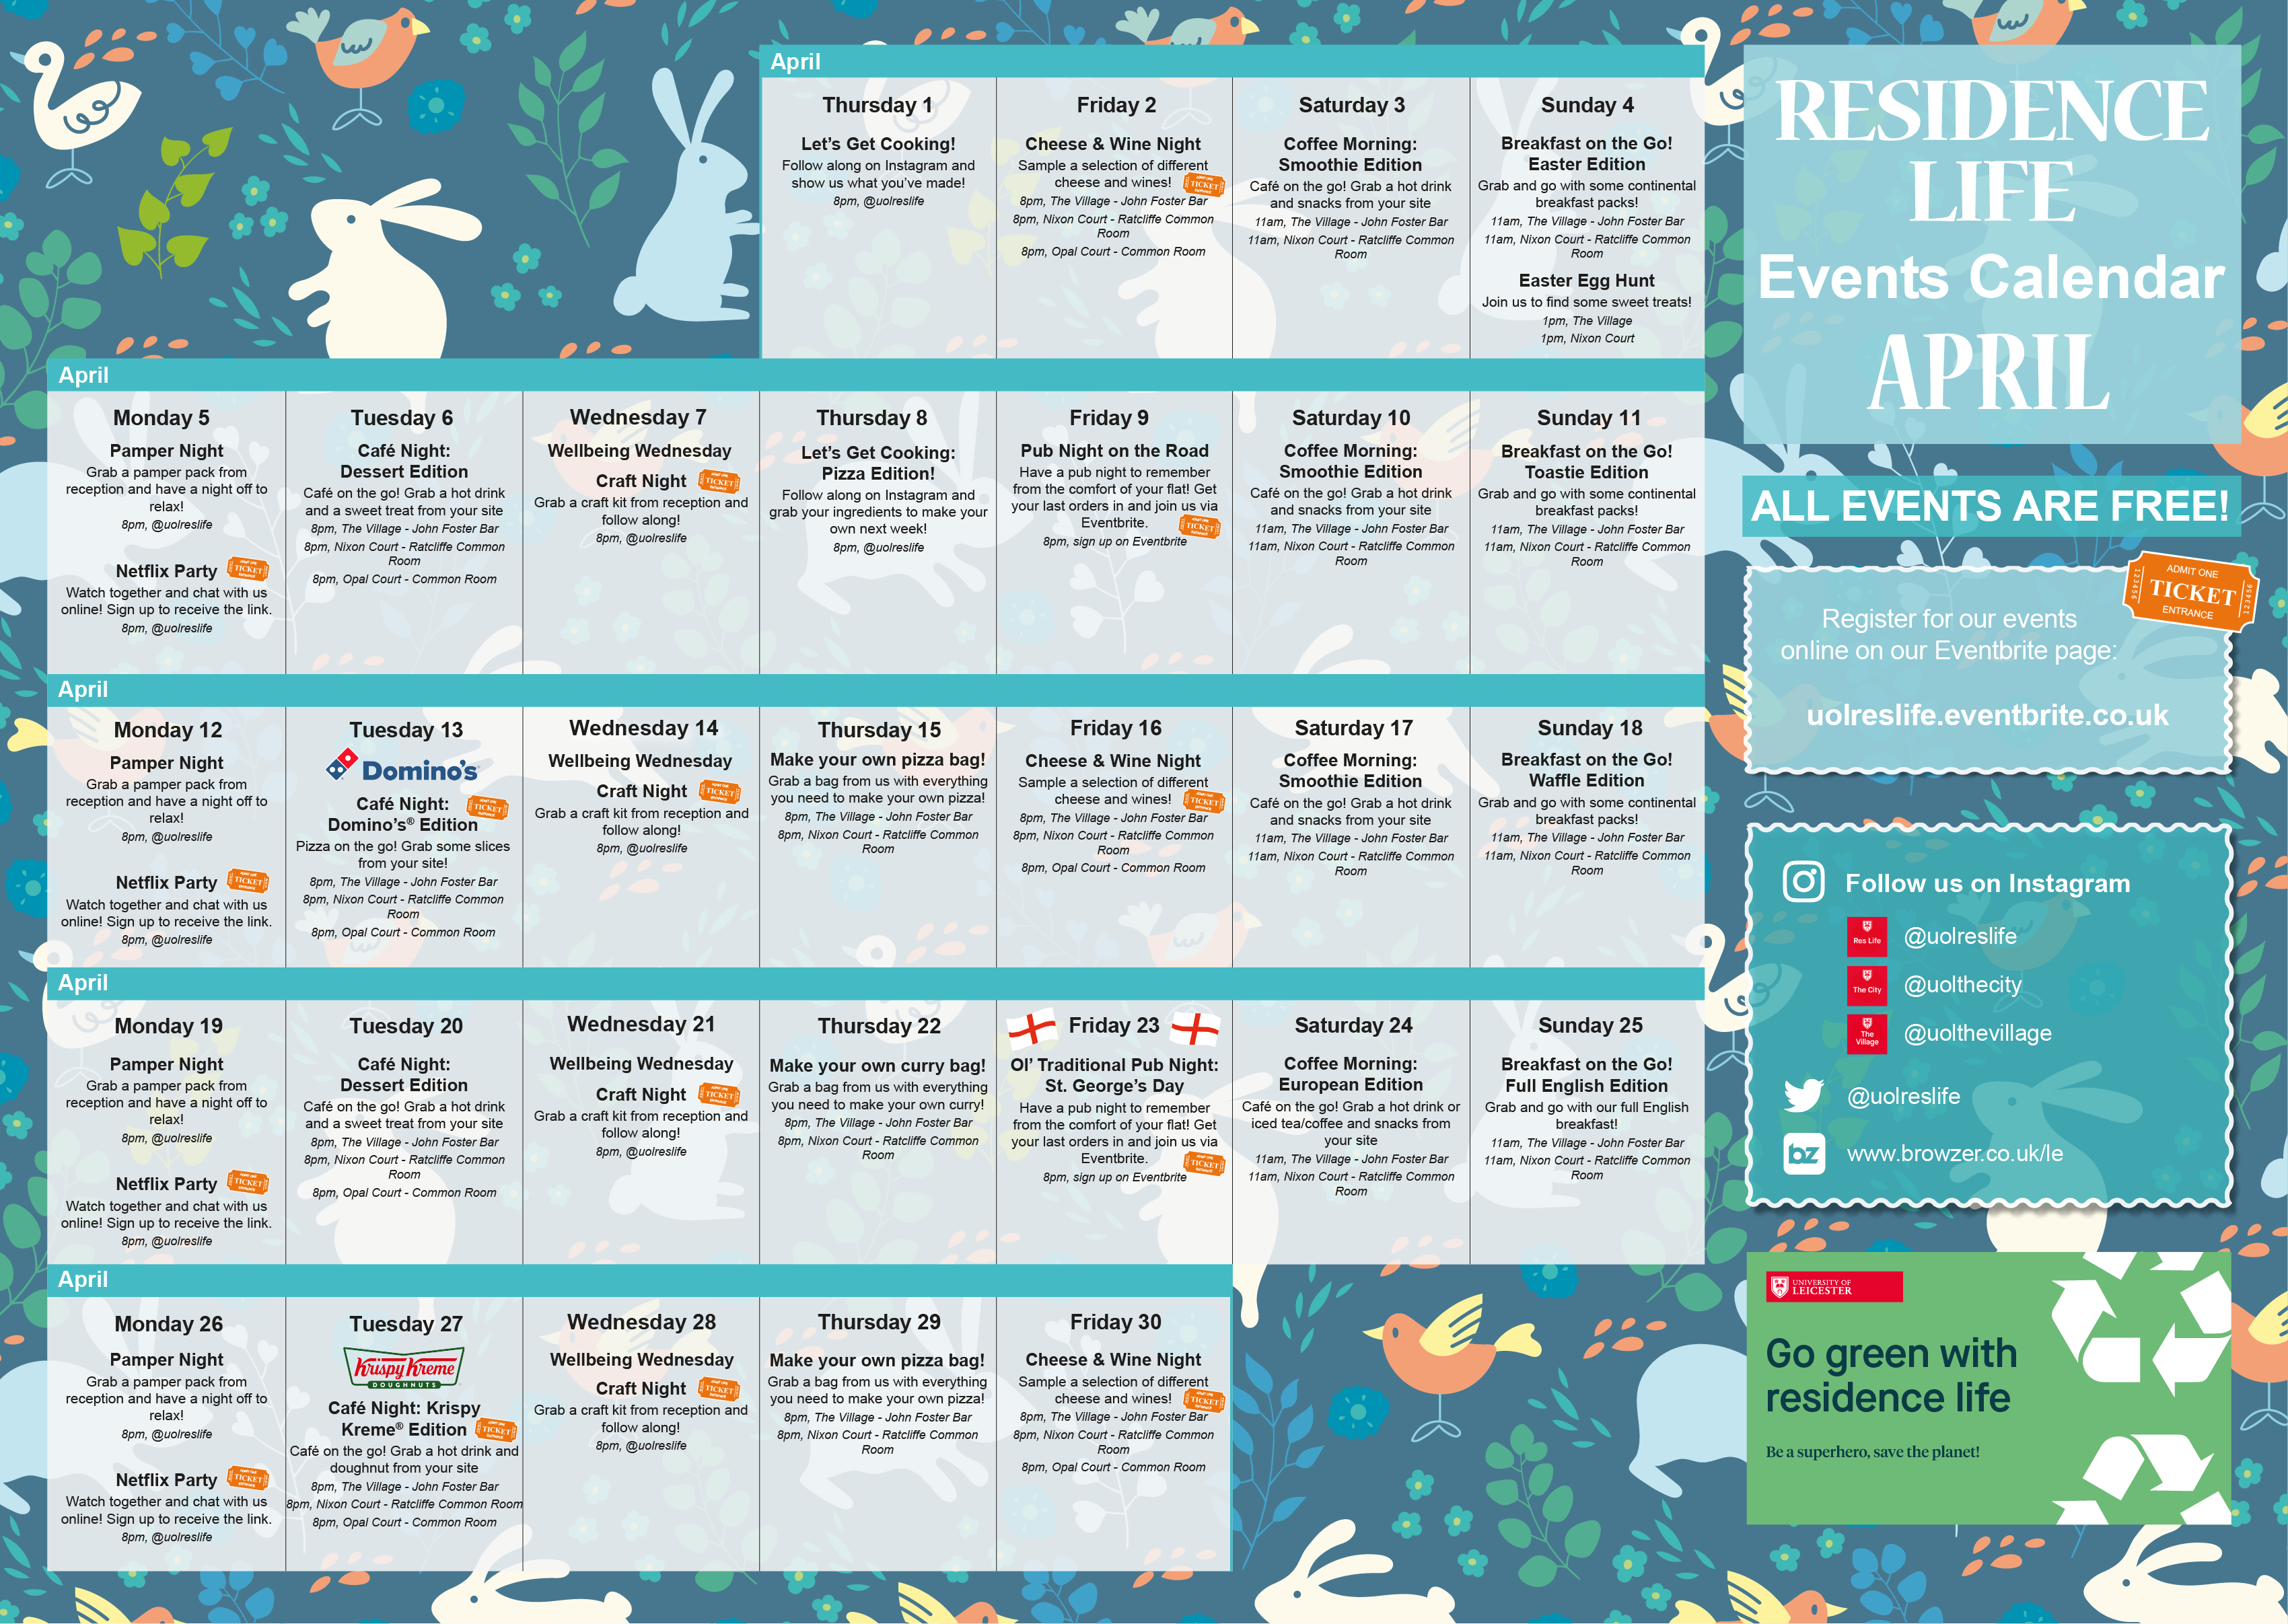 Browzer University of Leicester Residence Life Events Calendar